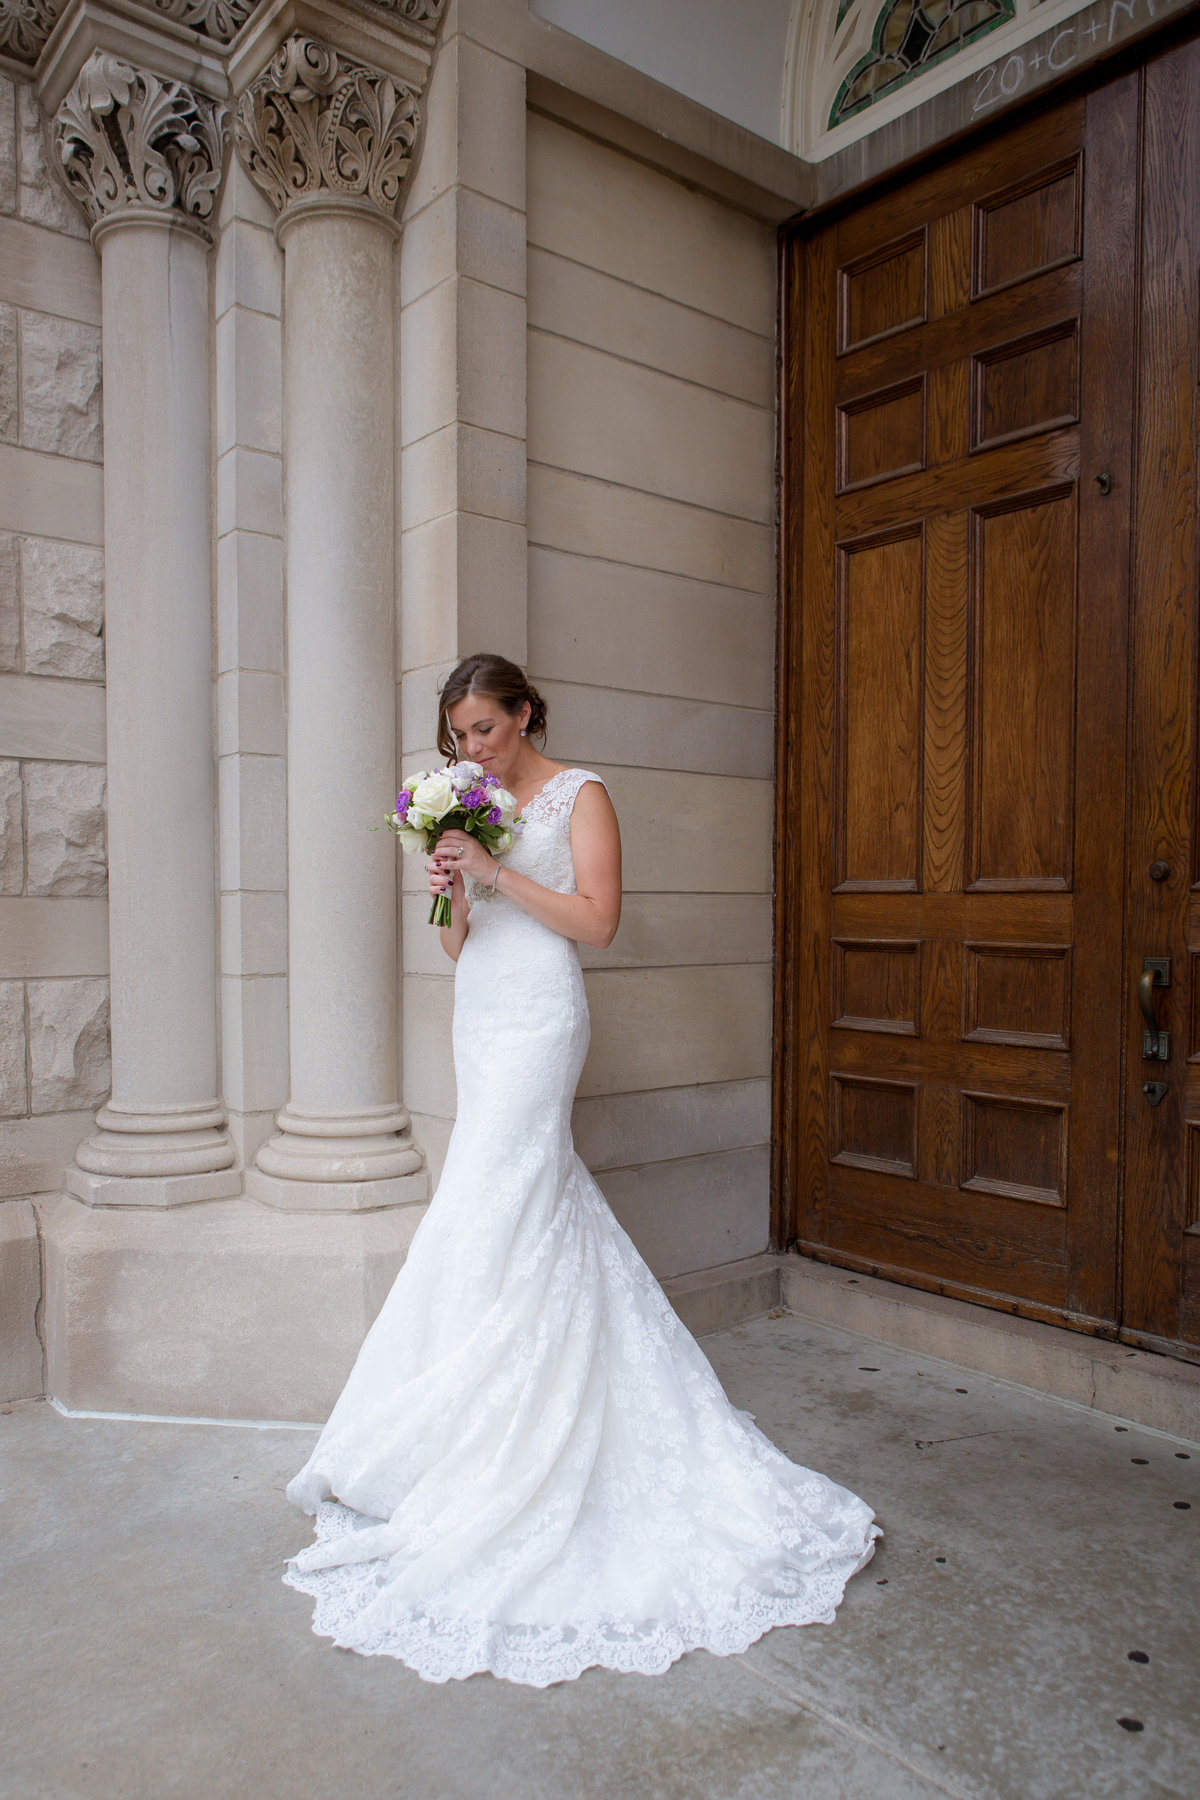 Weddings - Holly Dawn Photography - Wedding Photography - Family Photography - St. Charles - St. Louis - Missouri -29